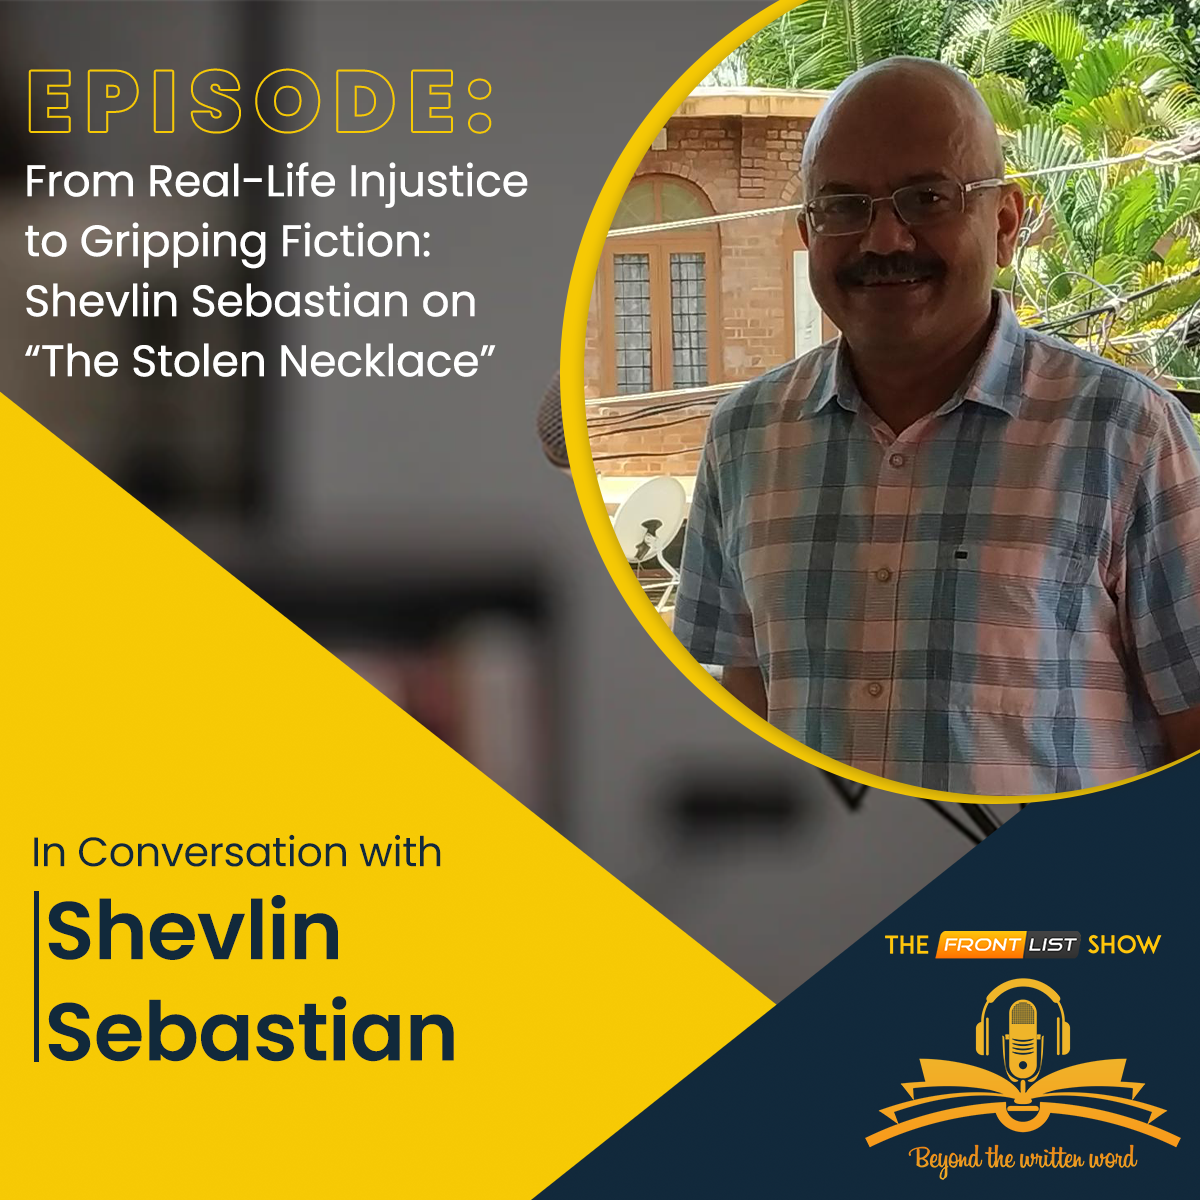 Episode 37 | From Real-Life Injustice to Gripping Fiction: Shevlin Sebastian on "The Stolen Necklace"